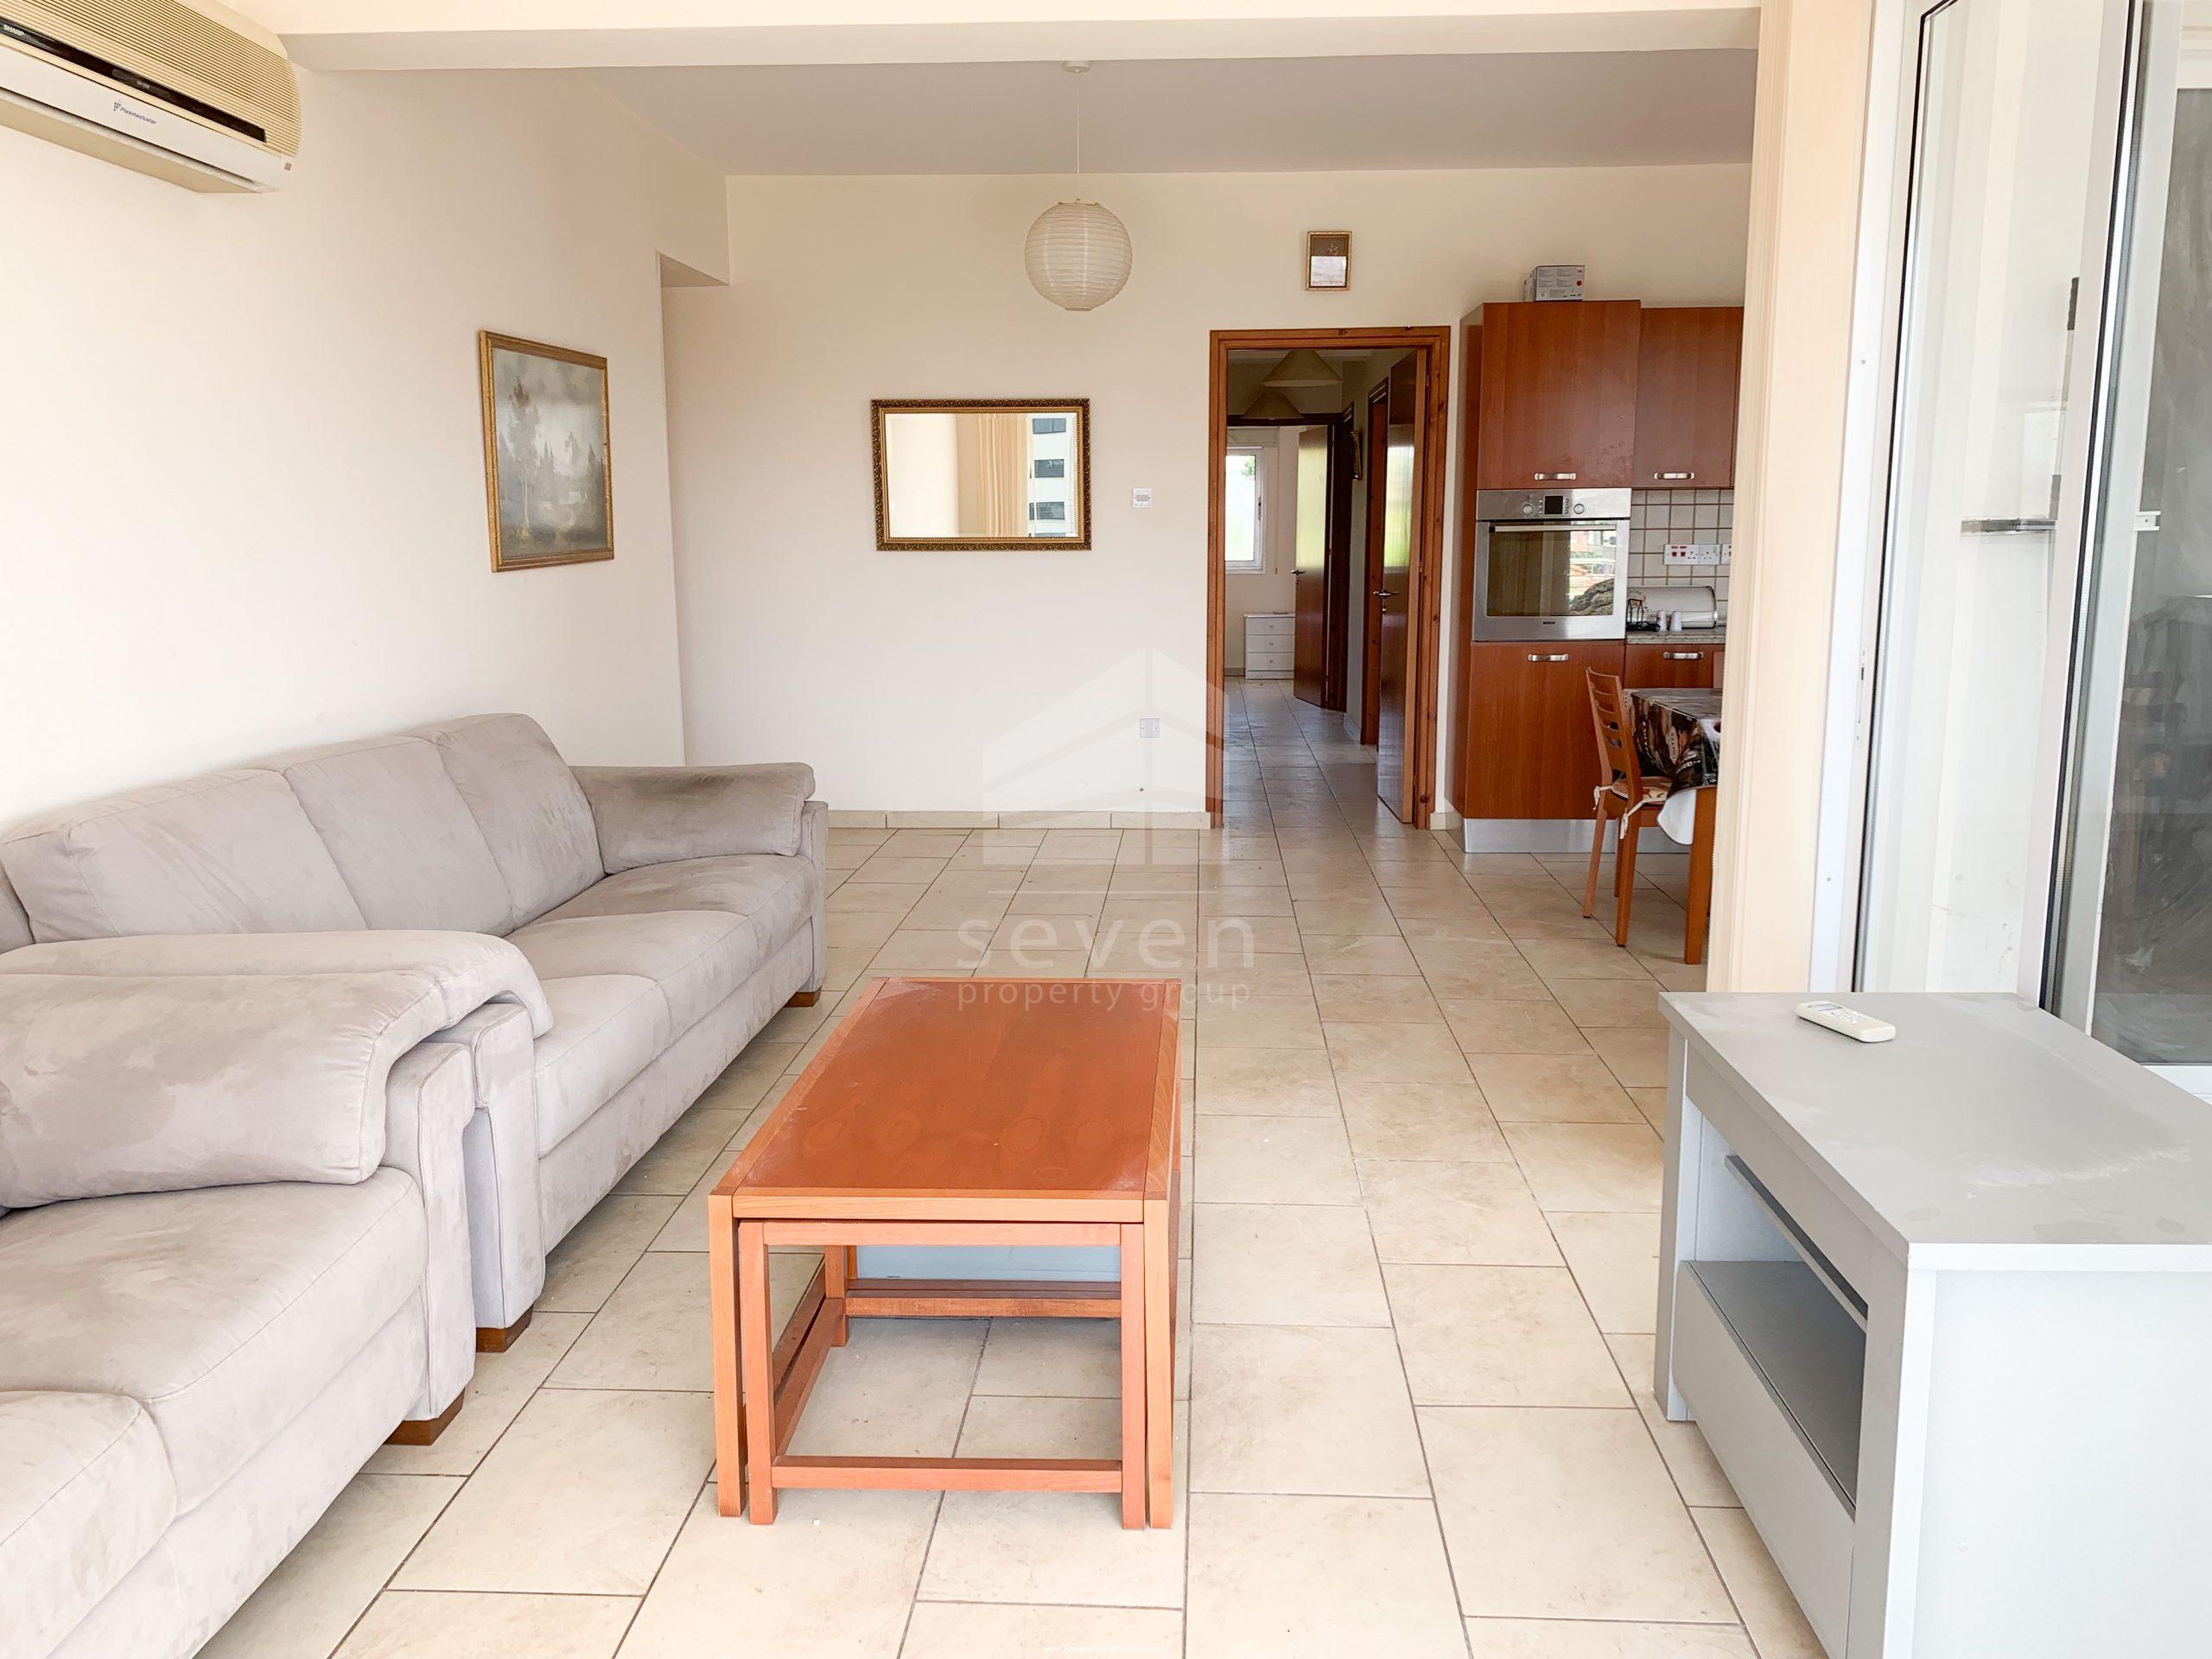 3bed Flat for Sale in Drosia